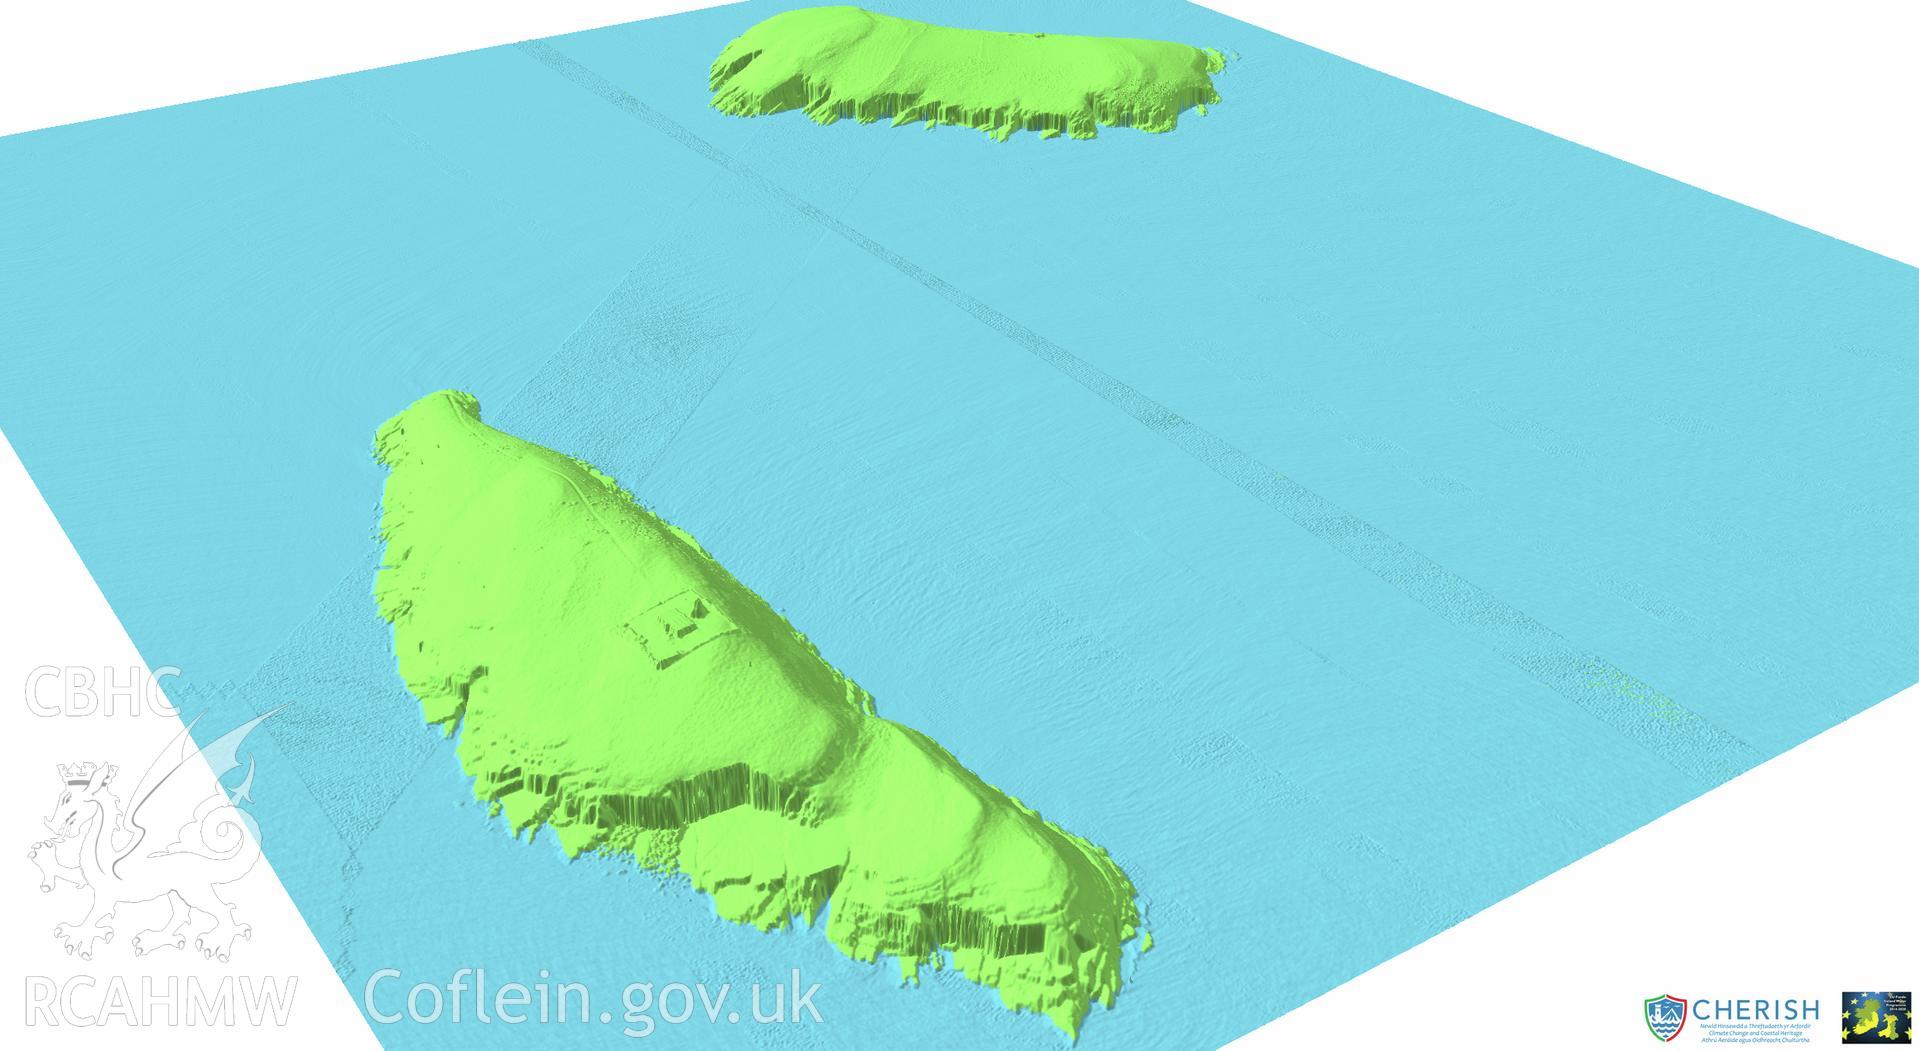 Ynysoedd Tudwal (St. Tudwal?s Islands). Airborne laser scanning (LiDAR) commissioned by the CHERISH Project 2017-2021, flown by Bluesky International LTD at low tide on 24th February 2017. View showing both islands facing north-east.